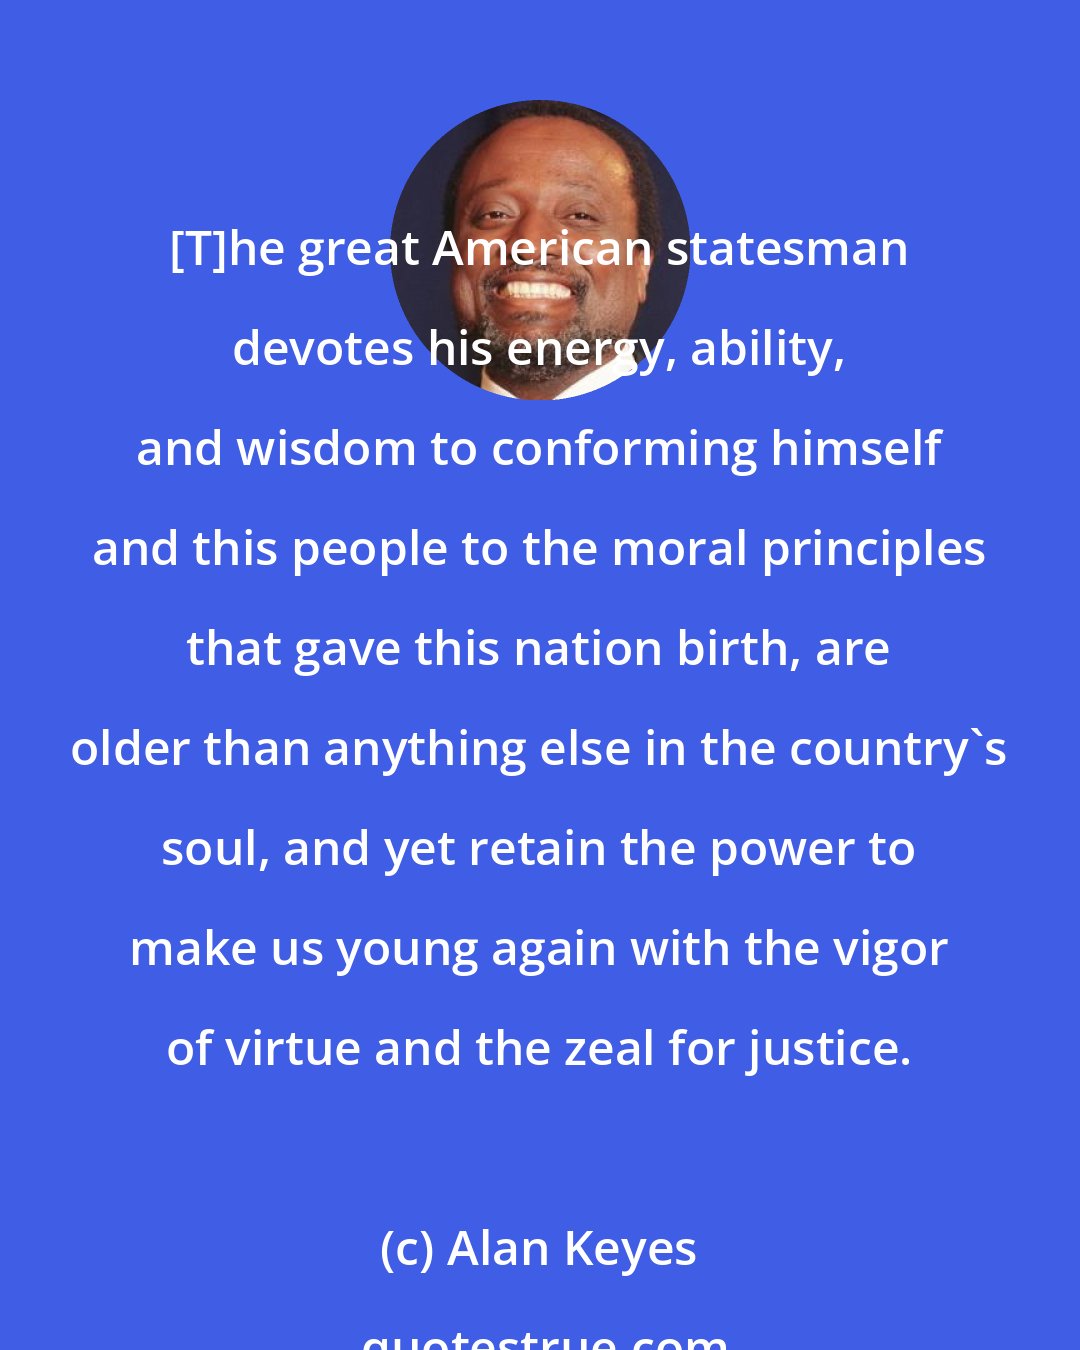 Alan Keyes: [T]he great American statesman devotes his energy, ability, and wisdom to conforming himself and this people to the moral principles that gave this nation birth, are older than anything else in the country's soul, and yet retain the power to make us young again with the vigor of virtue and the zeal for justice.